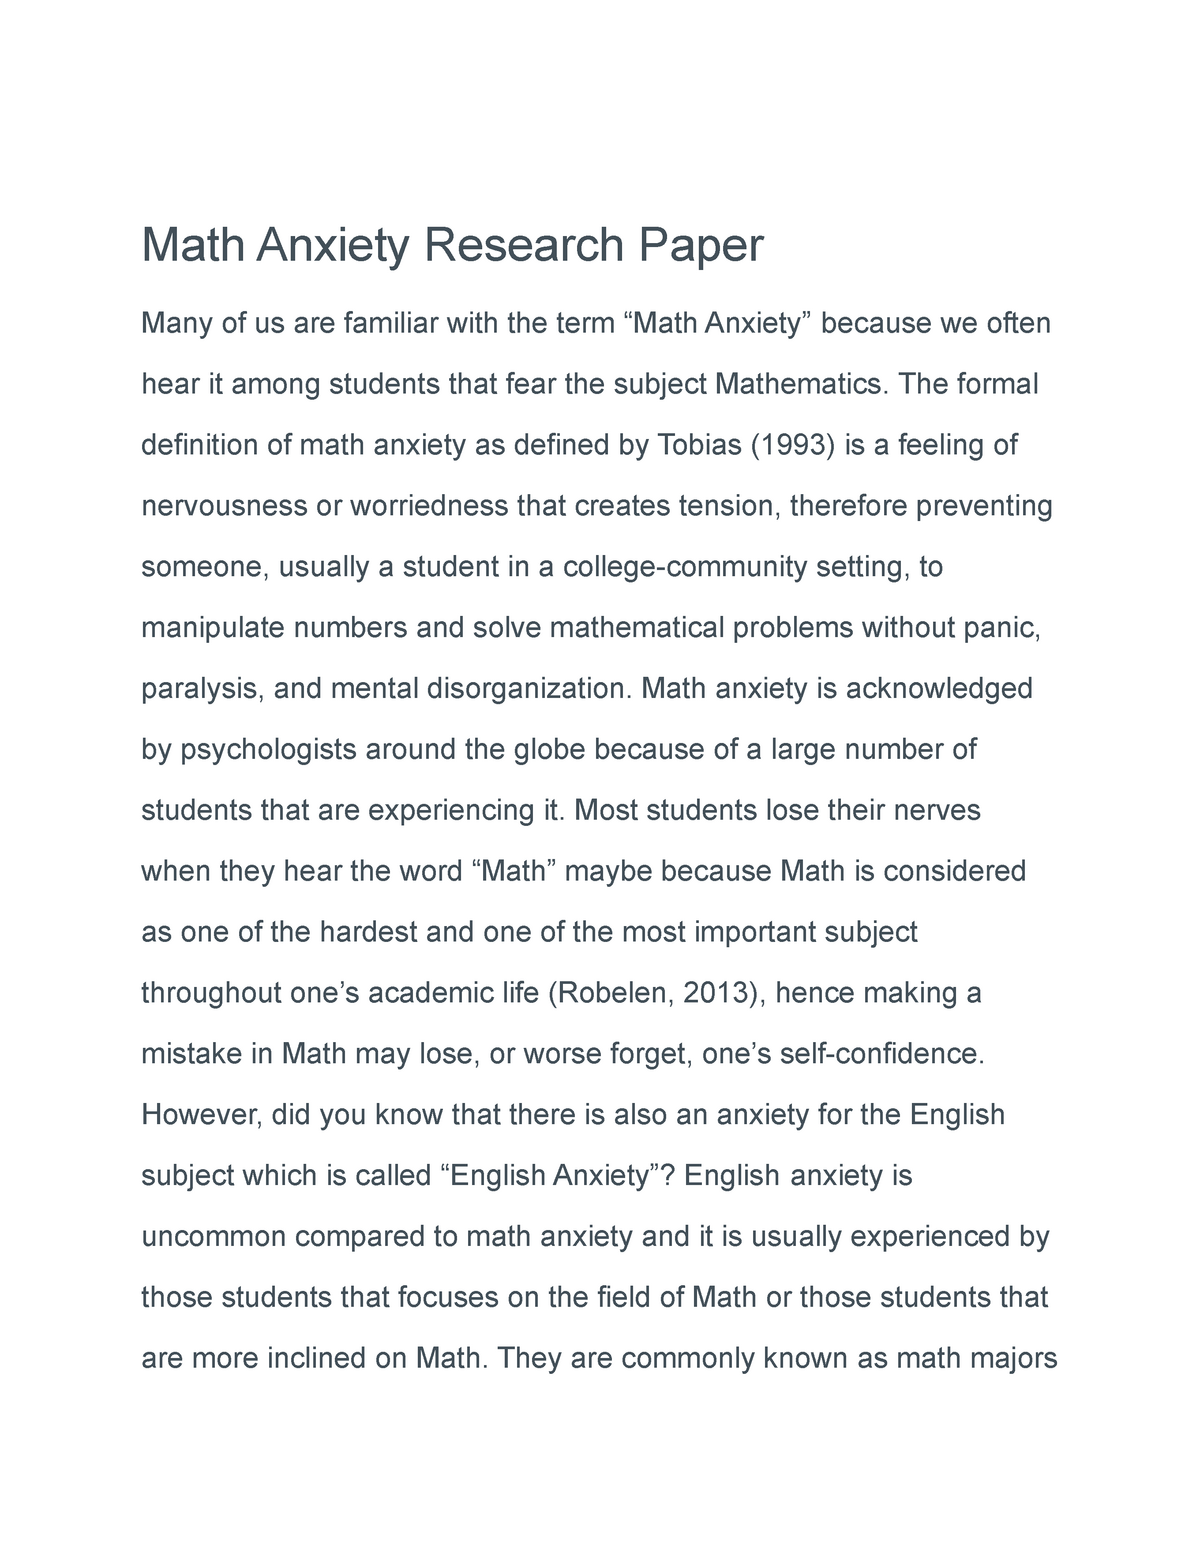 research paper on math anxiety